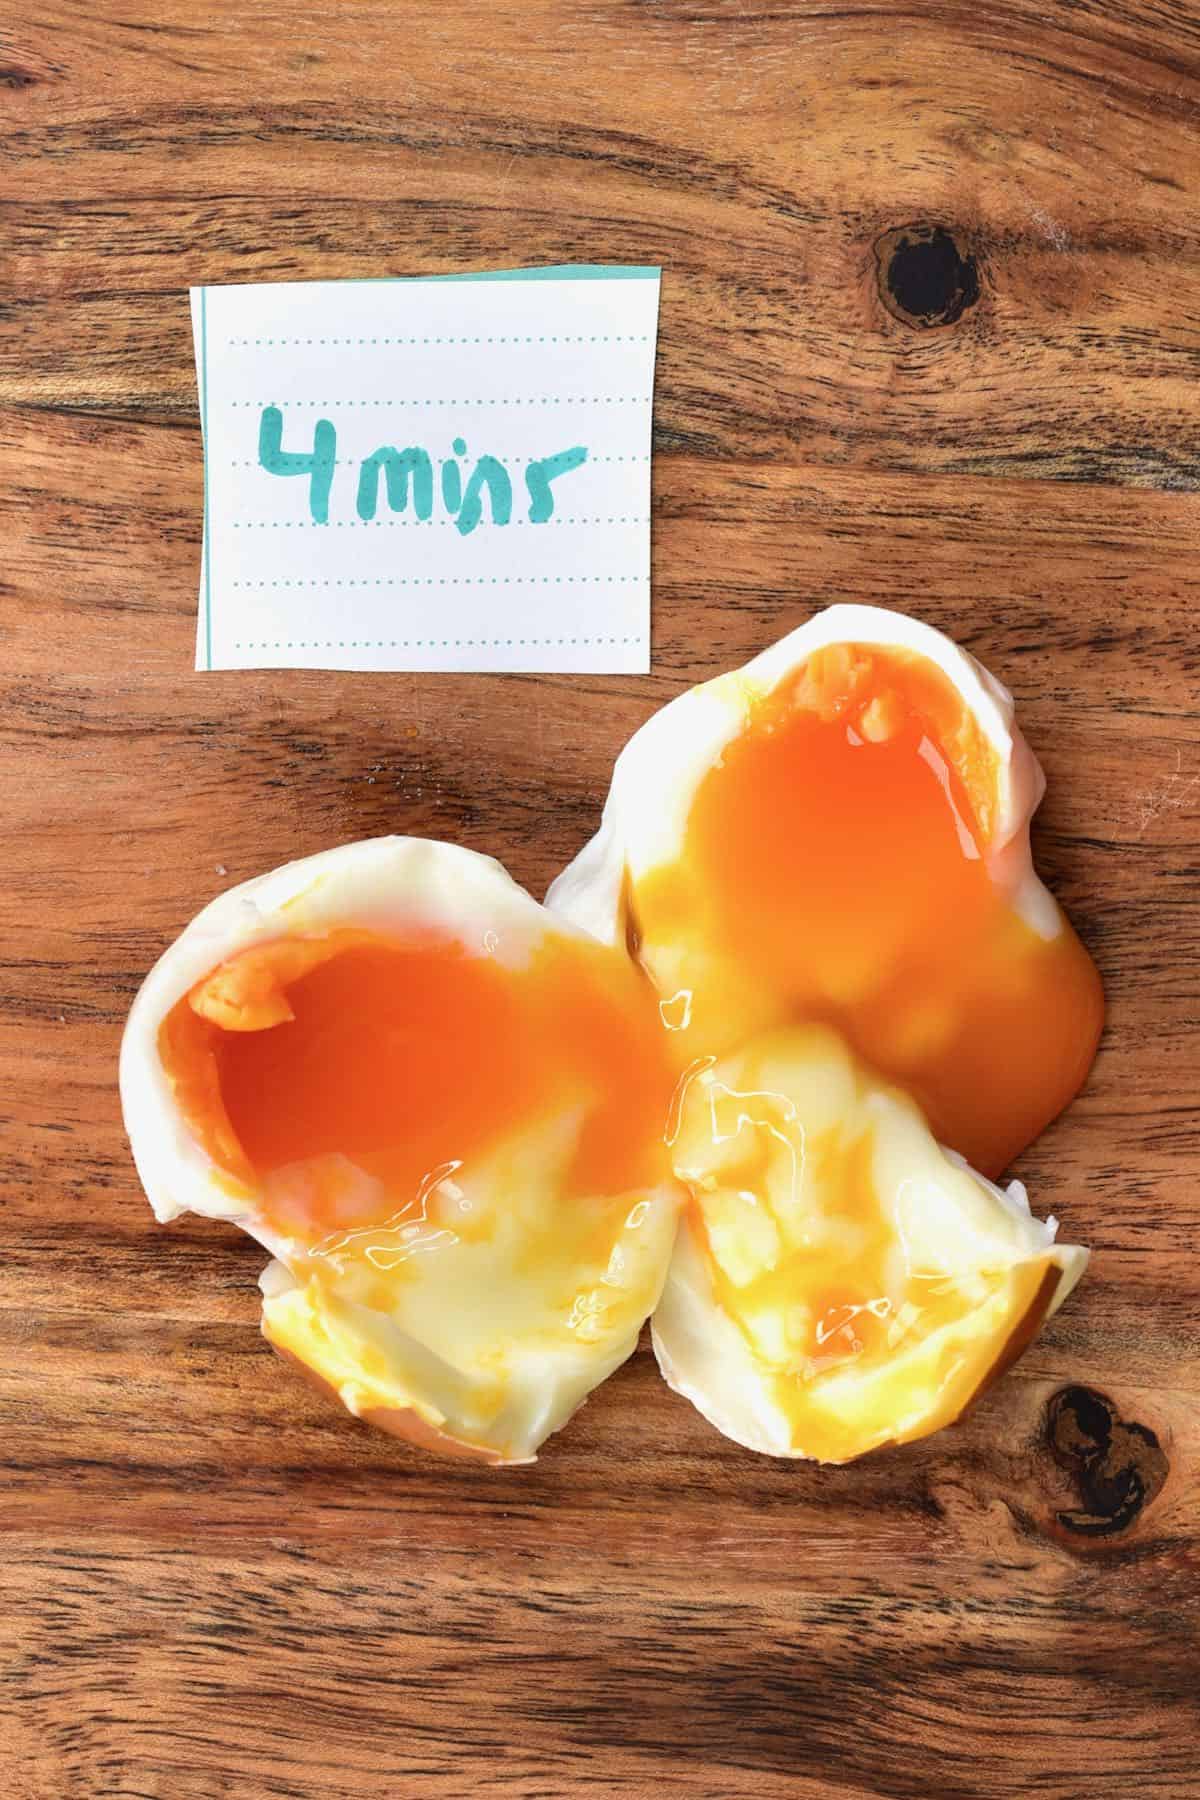 Egg boiled for 4 minutes cut in two